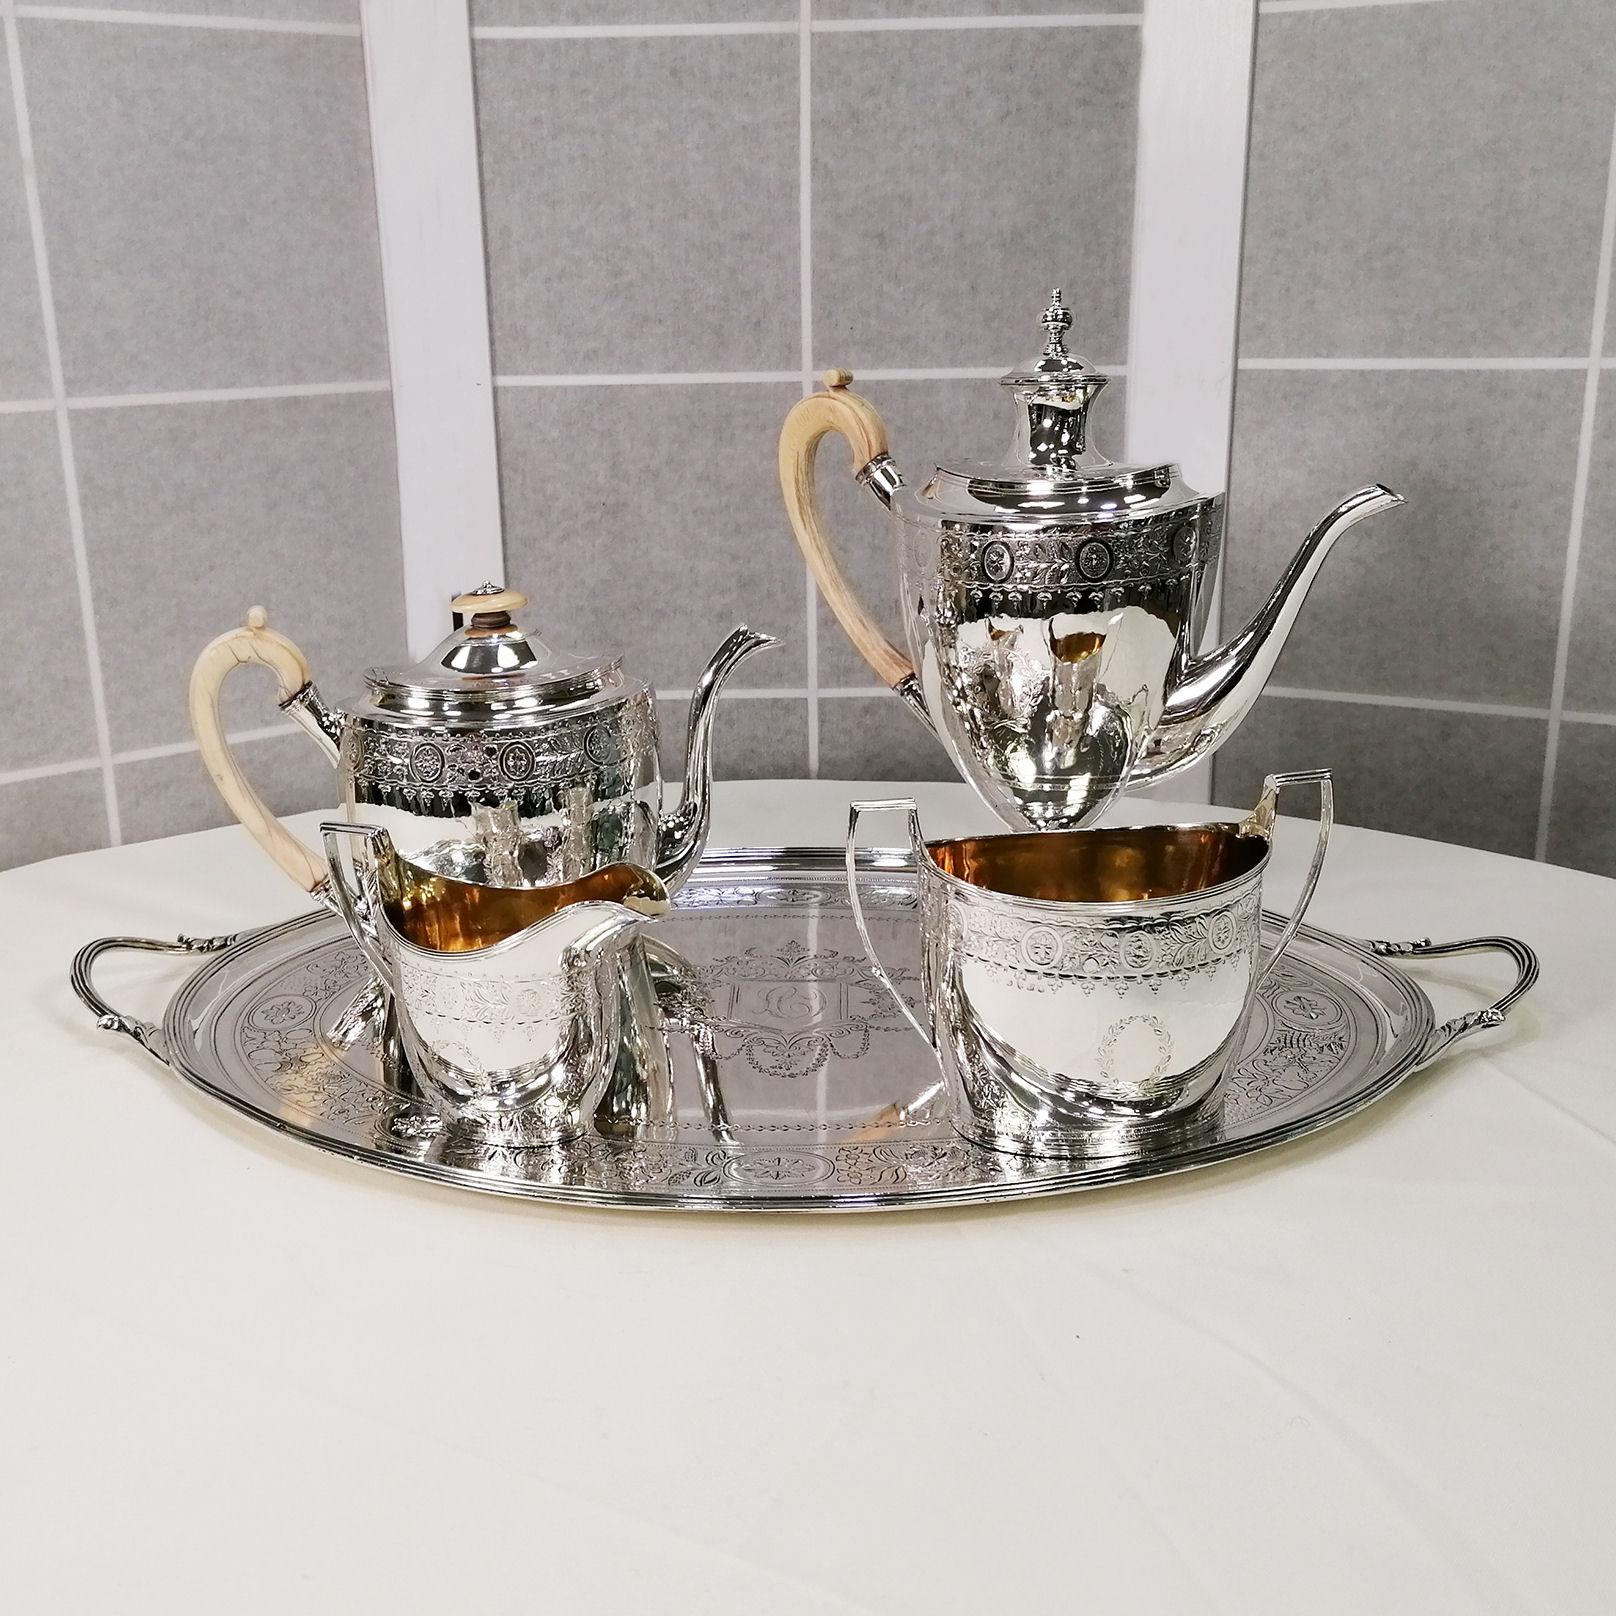 Rare George III Sterling Silver Tea-Coffeeset ivory Handles plus tray 1799-1800
Hallmarked in London in 1798-9 by Charles Asprey, this superb, George III, Antique Sterling Silver Tea Set, is oval in shape, and features bands of engraved decoration